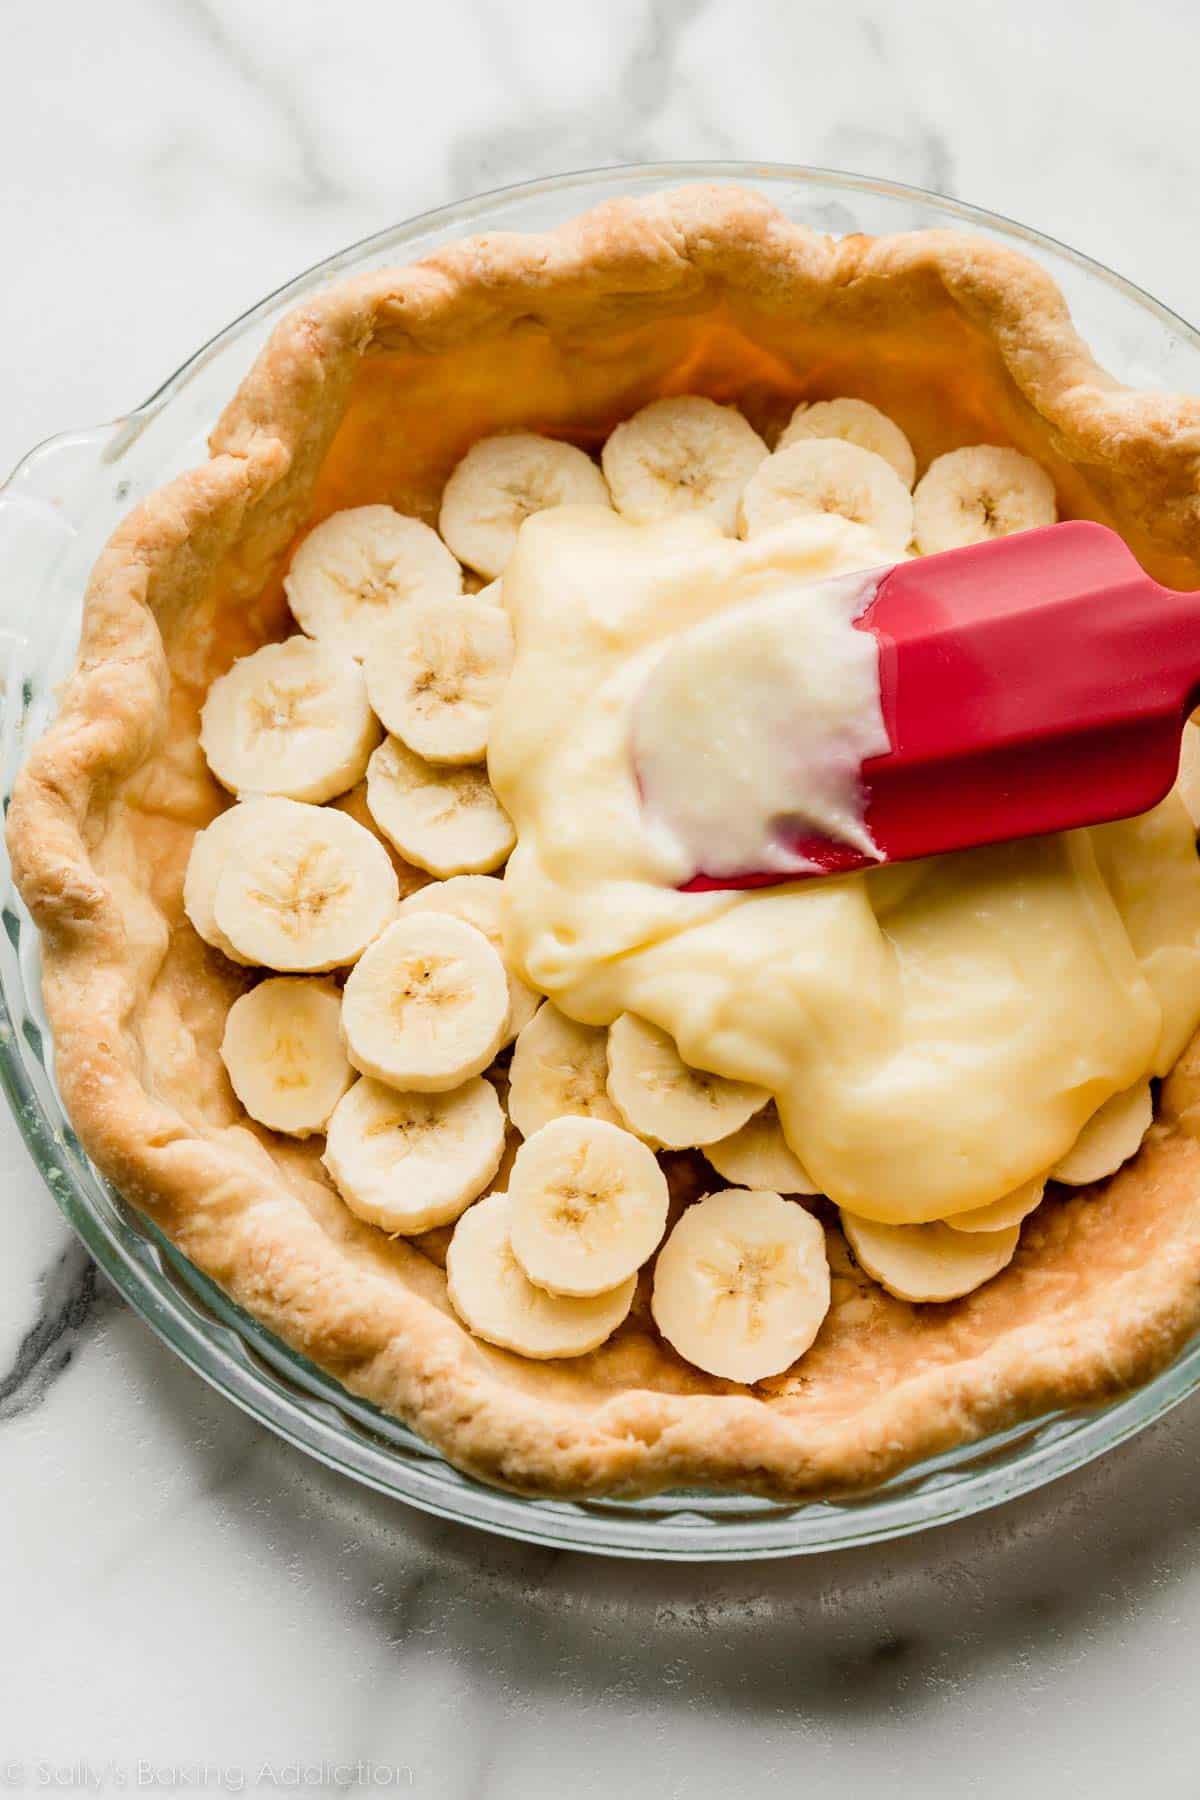 spreading pudding over bananas in a baked pie crust shell.